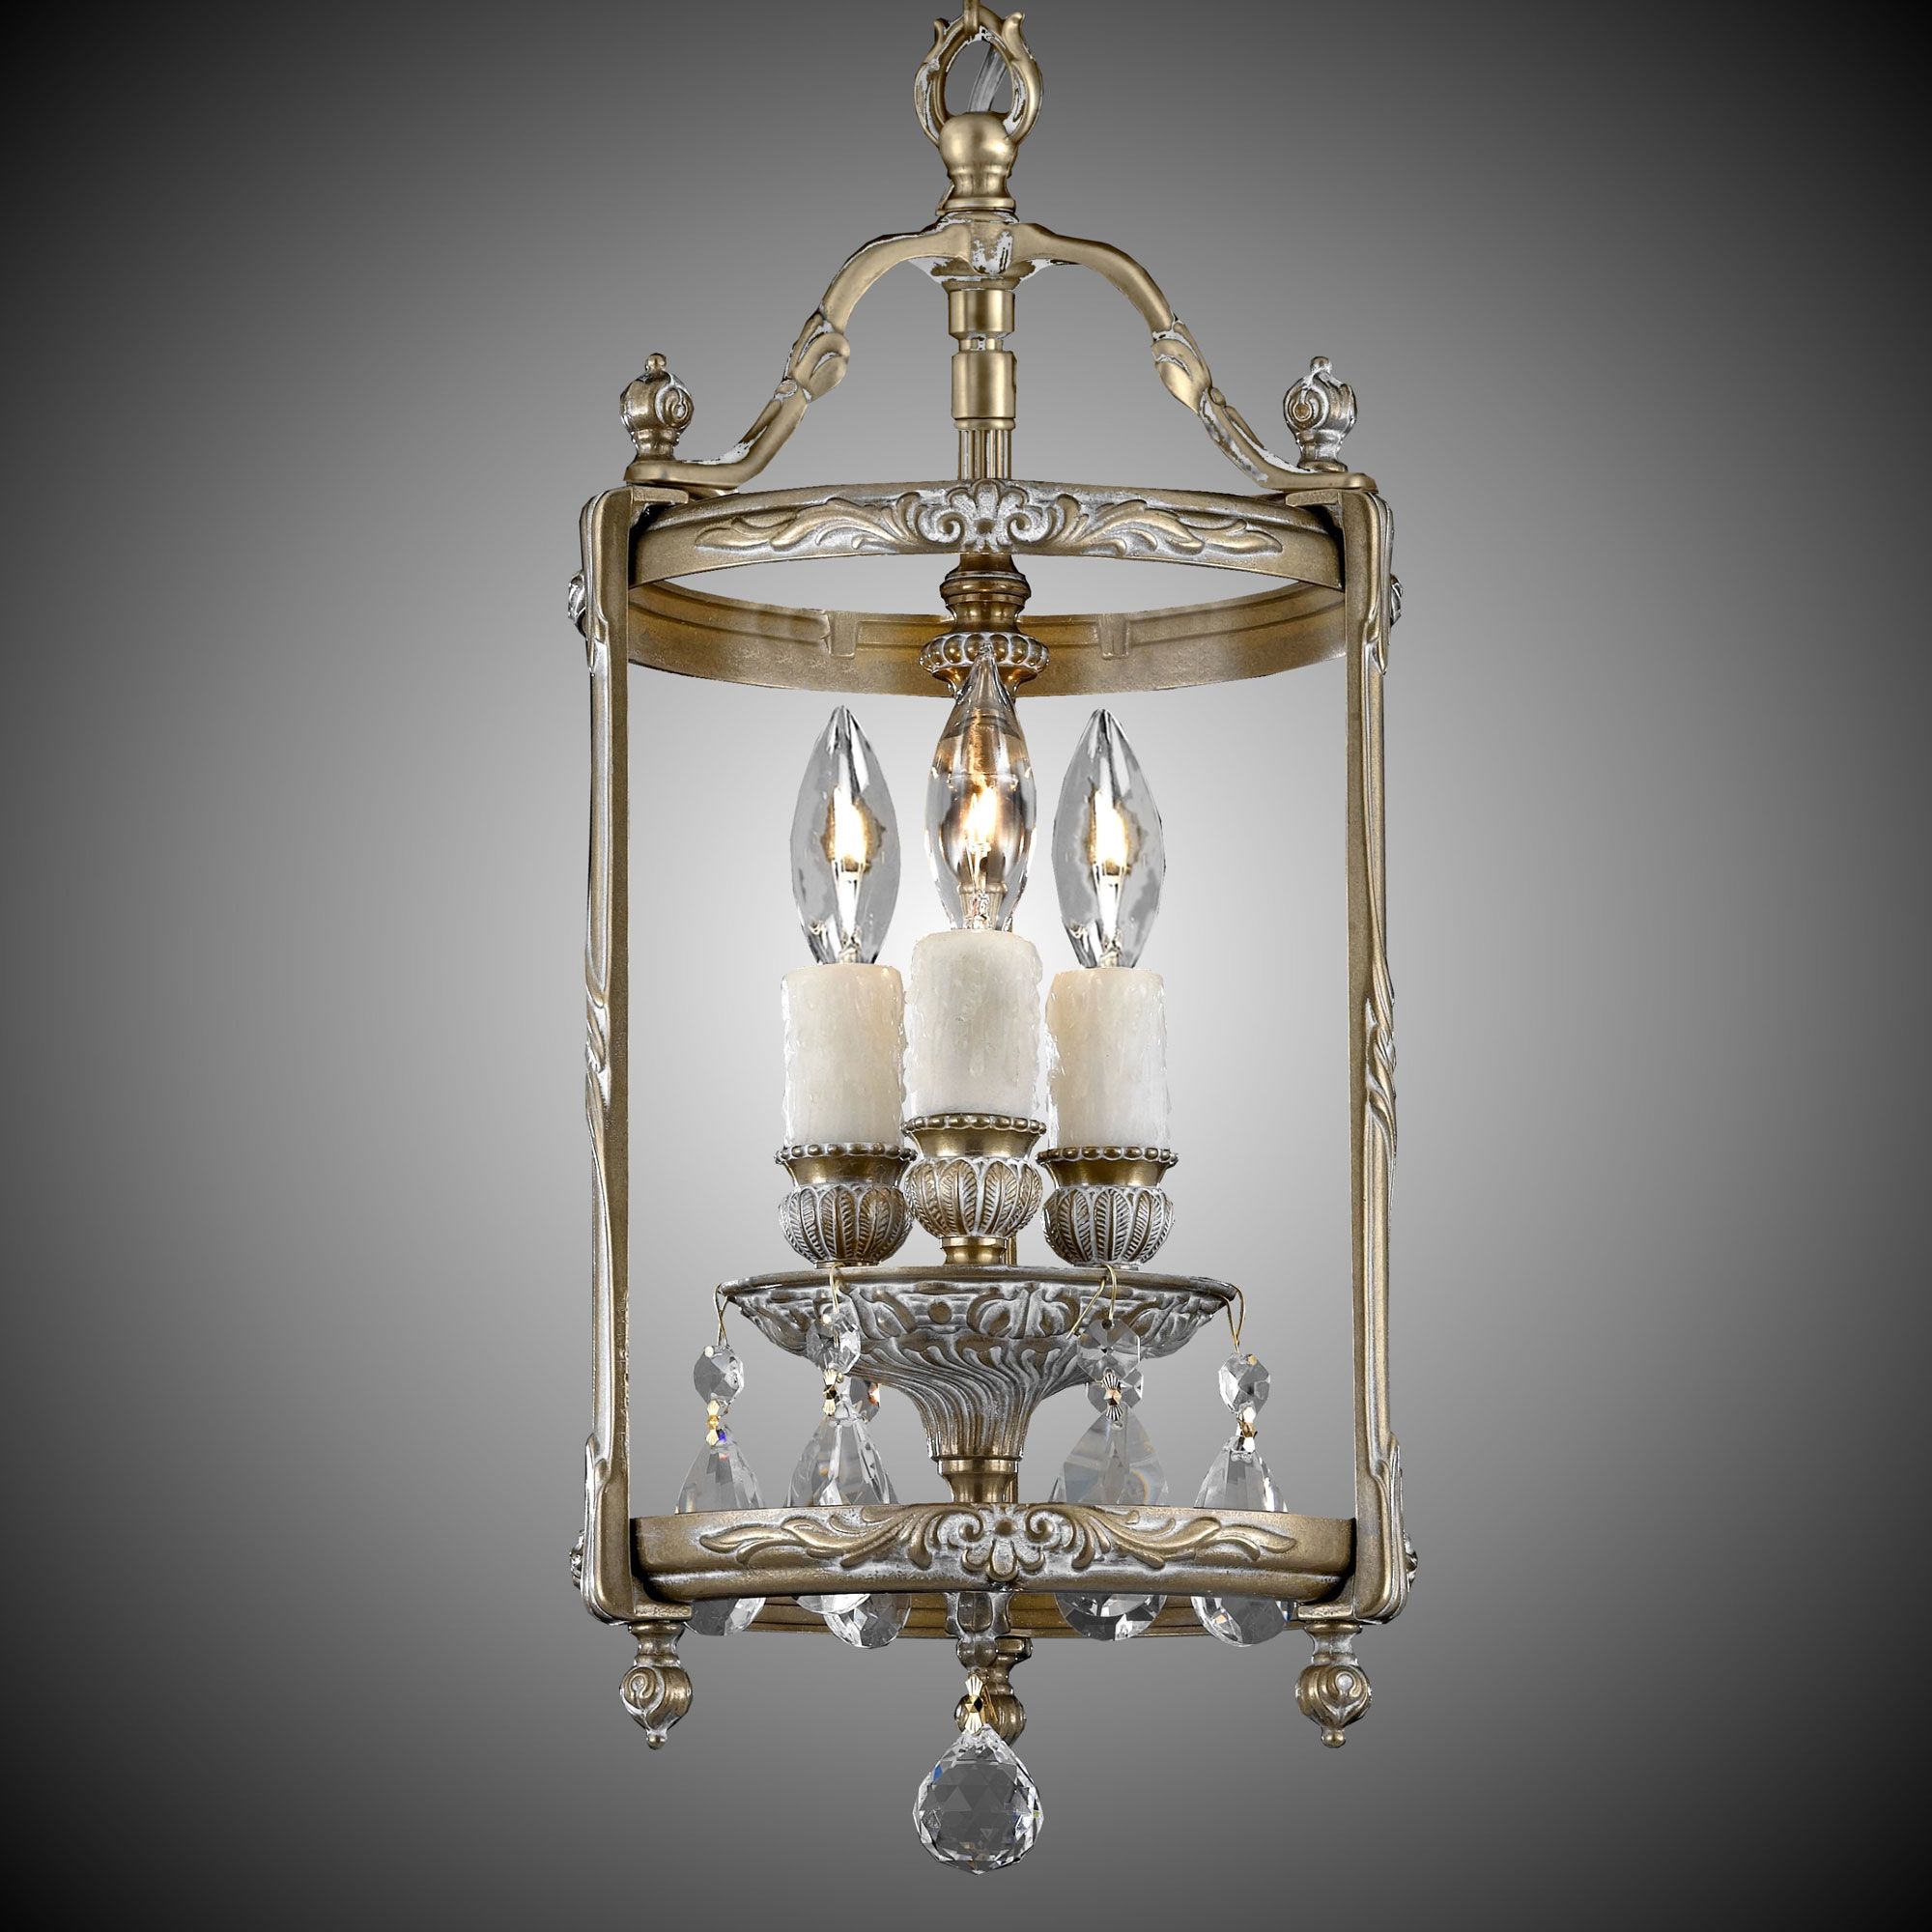 Abc874575 For Widely Used Brass Wrapped Lantern Chandeliers (View 11 of 15)